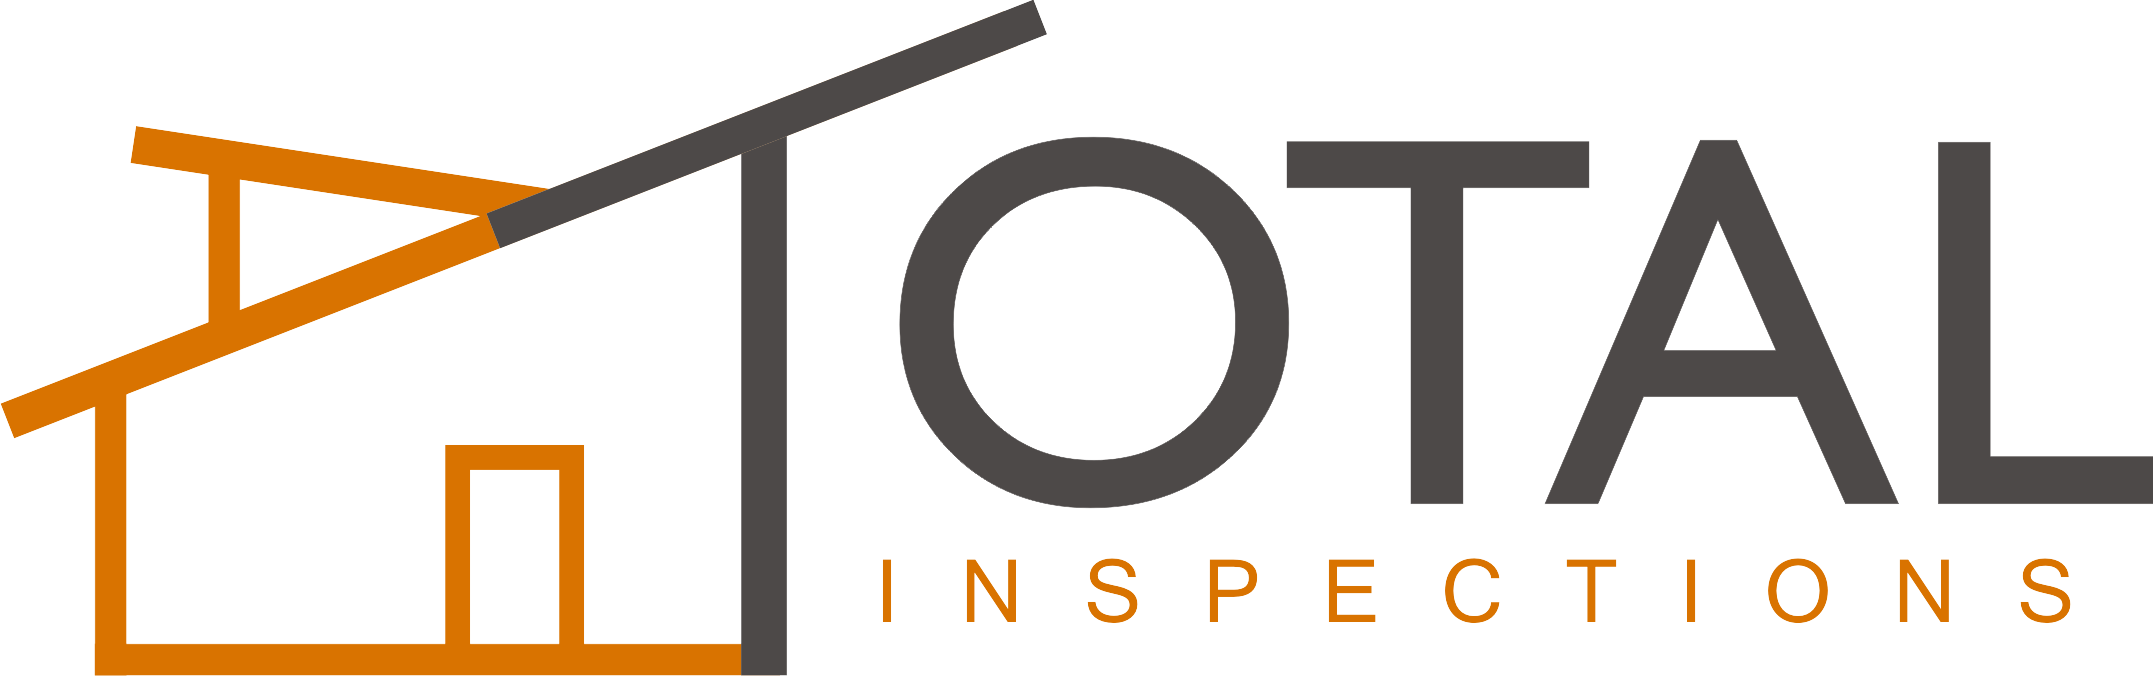 Inspection Logo - Total Home Inspection | Arizona Home Inspector – Pre-Purchase ...